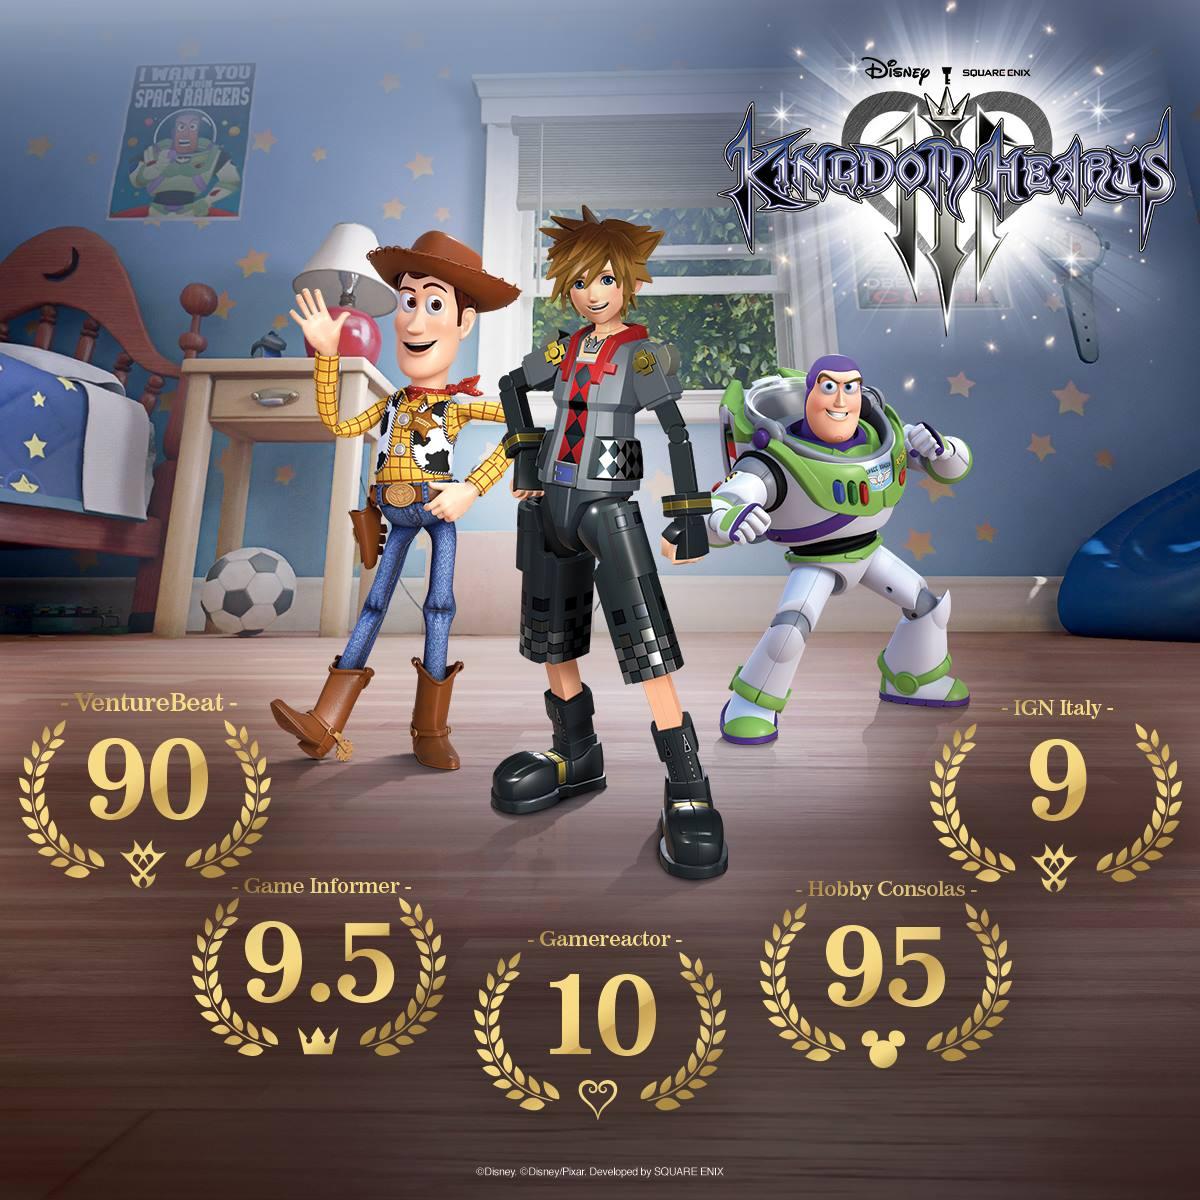 9 Things We Want From Kingdom Hearts 3 - GameSpot